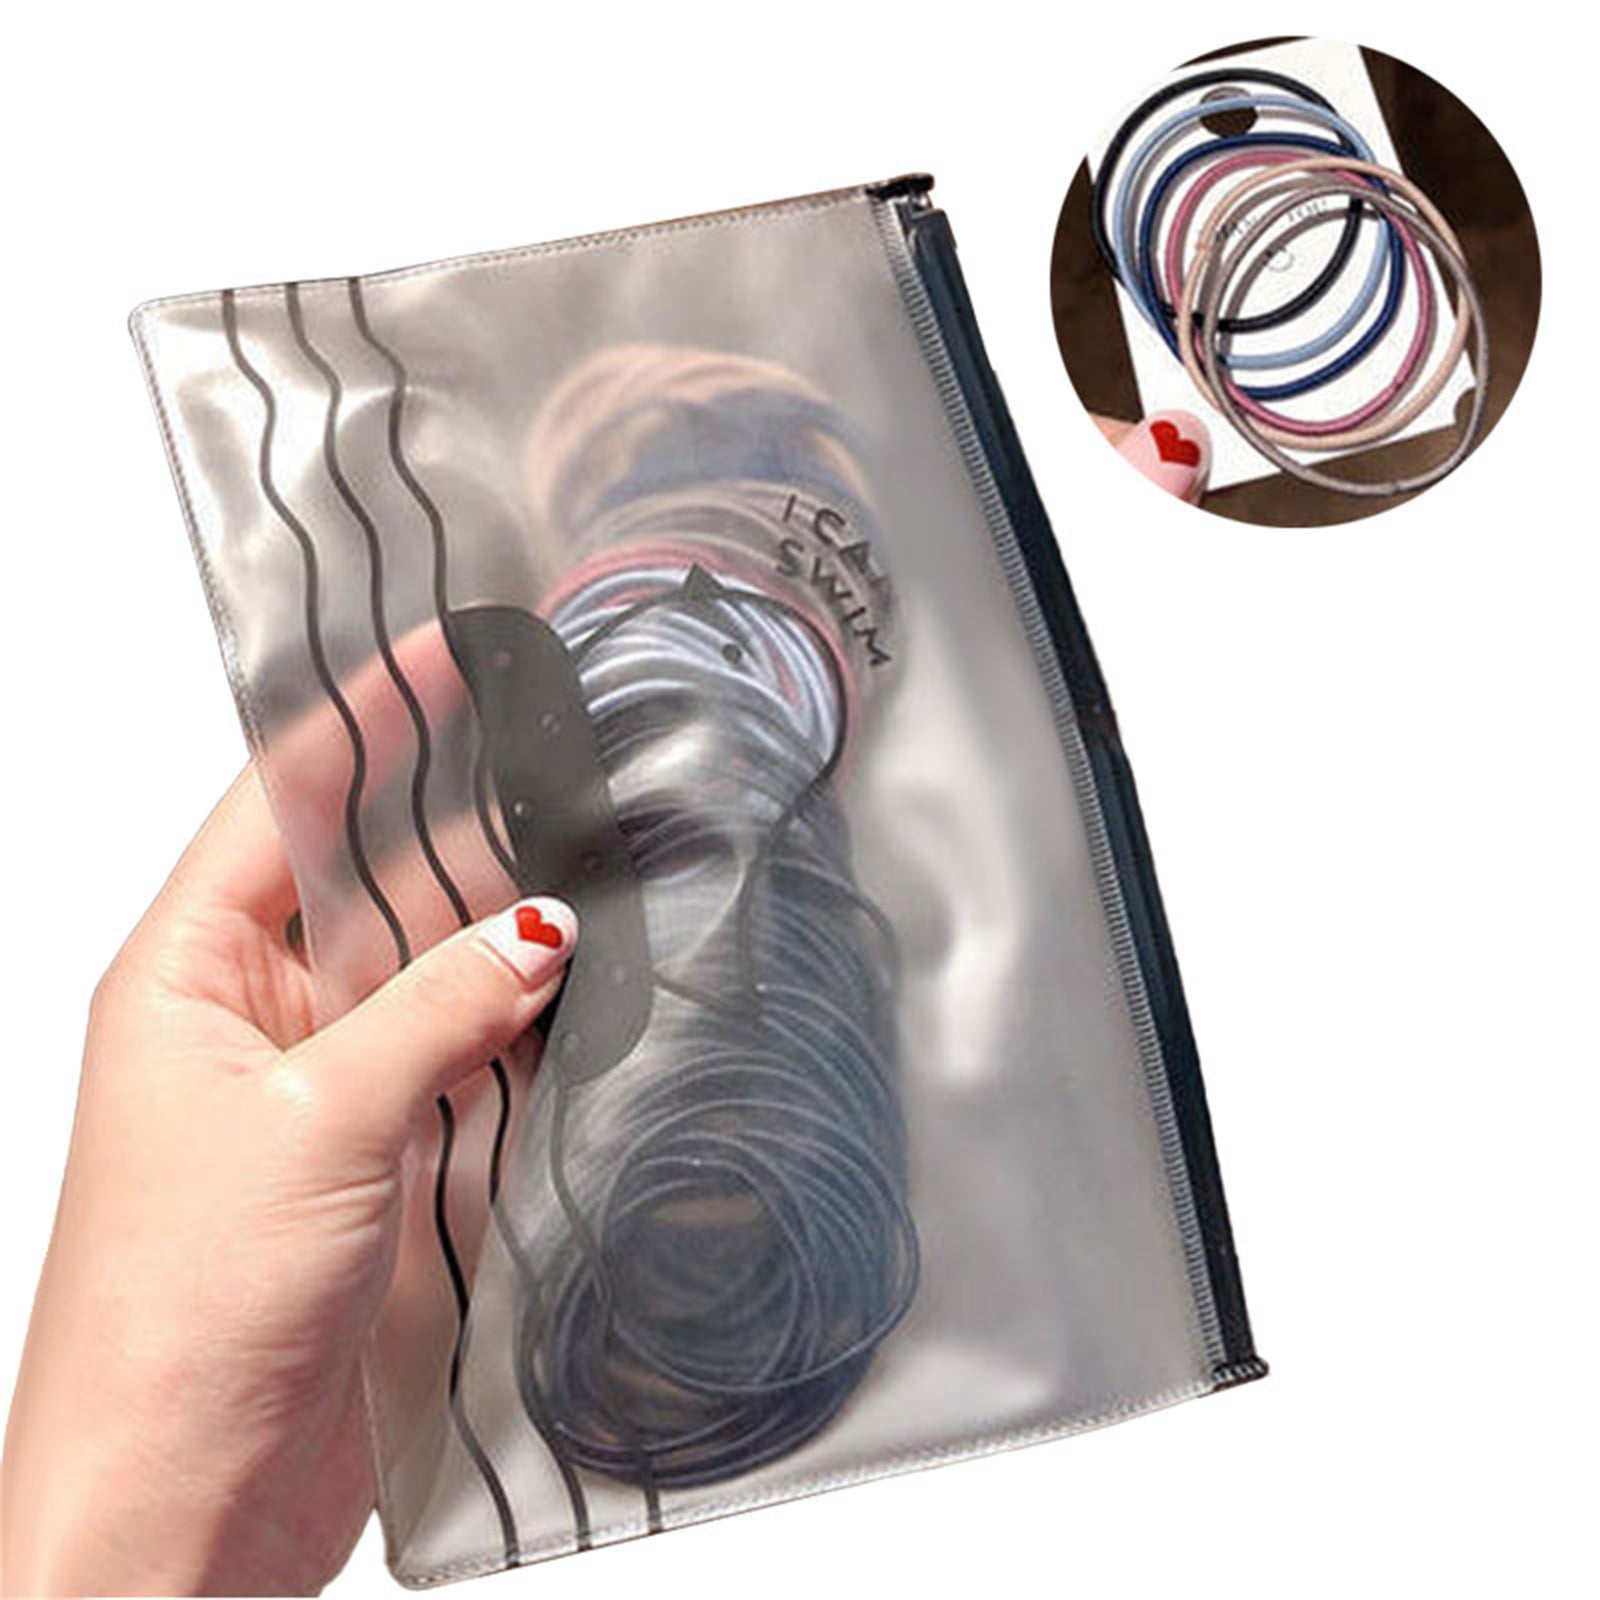 HSMQHJWE Clear Elastics Be Can And Reused Do Suitable Hair Band Women 100  Hair For Girls Rubber Soft Elastic Not Damage Rings Sleeping Bonnet for  Curly Hair Ties 